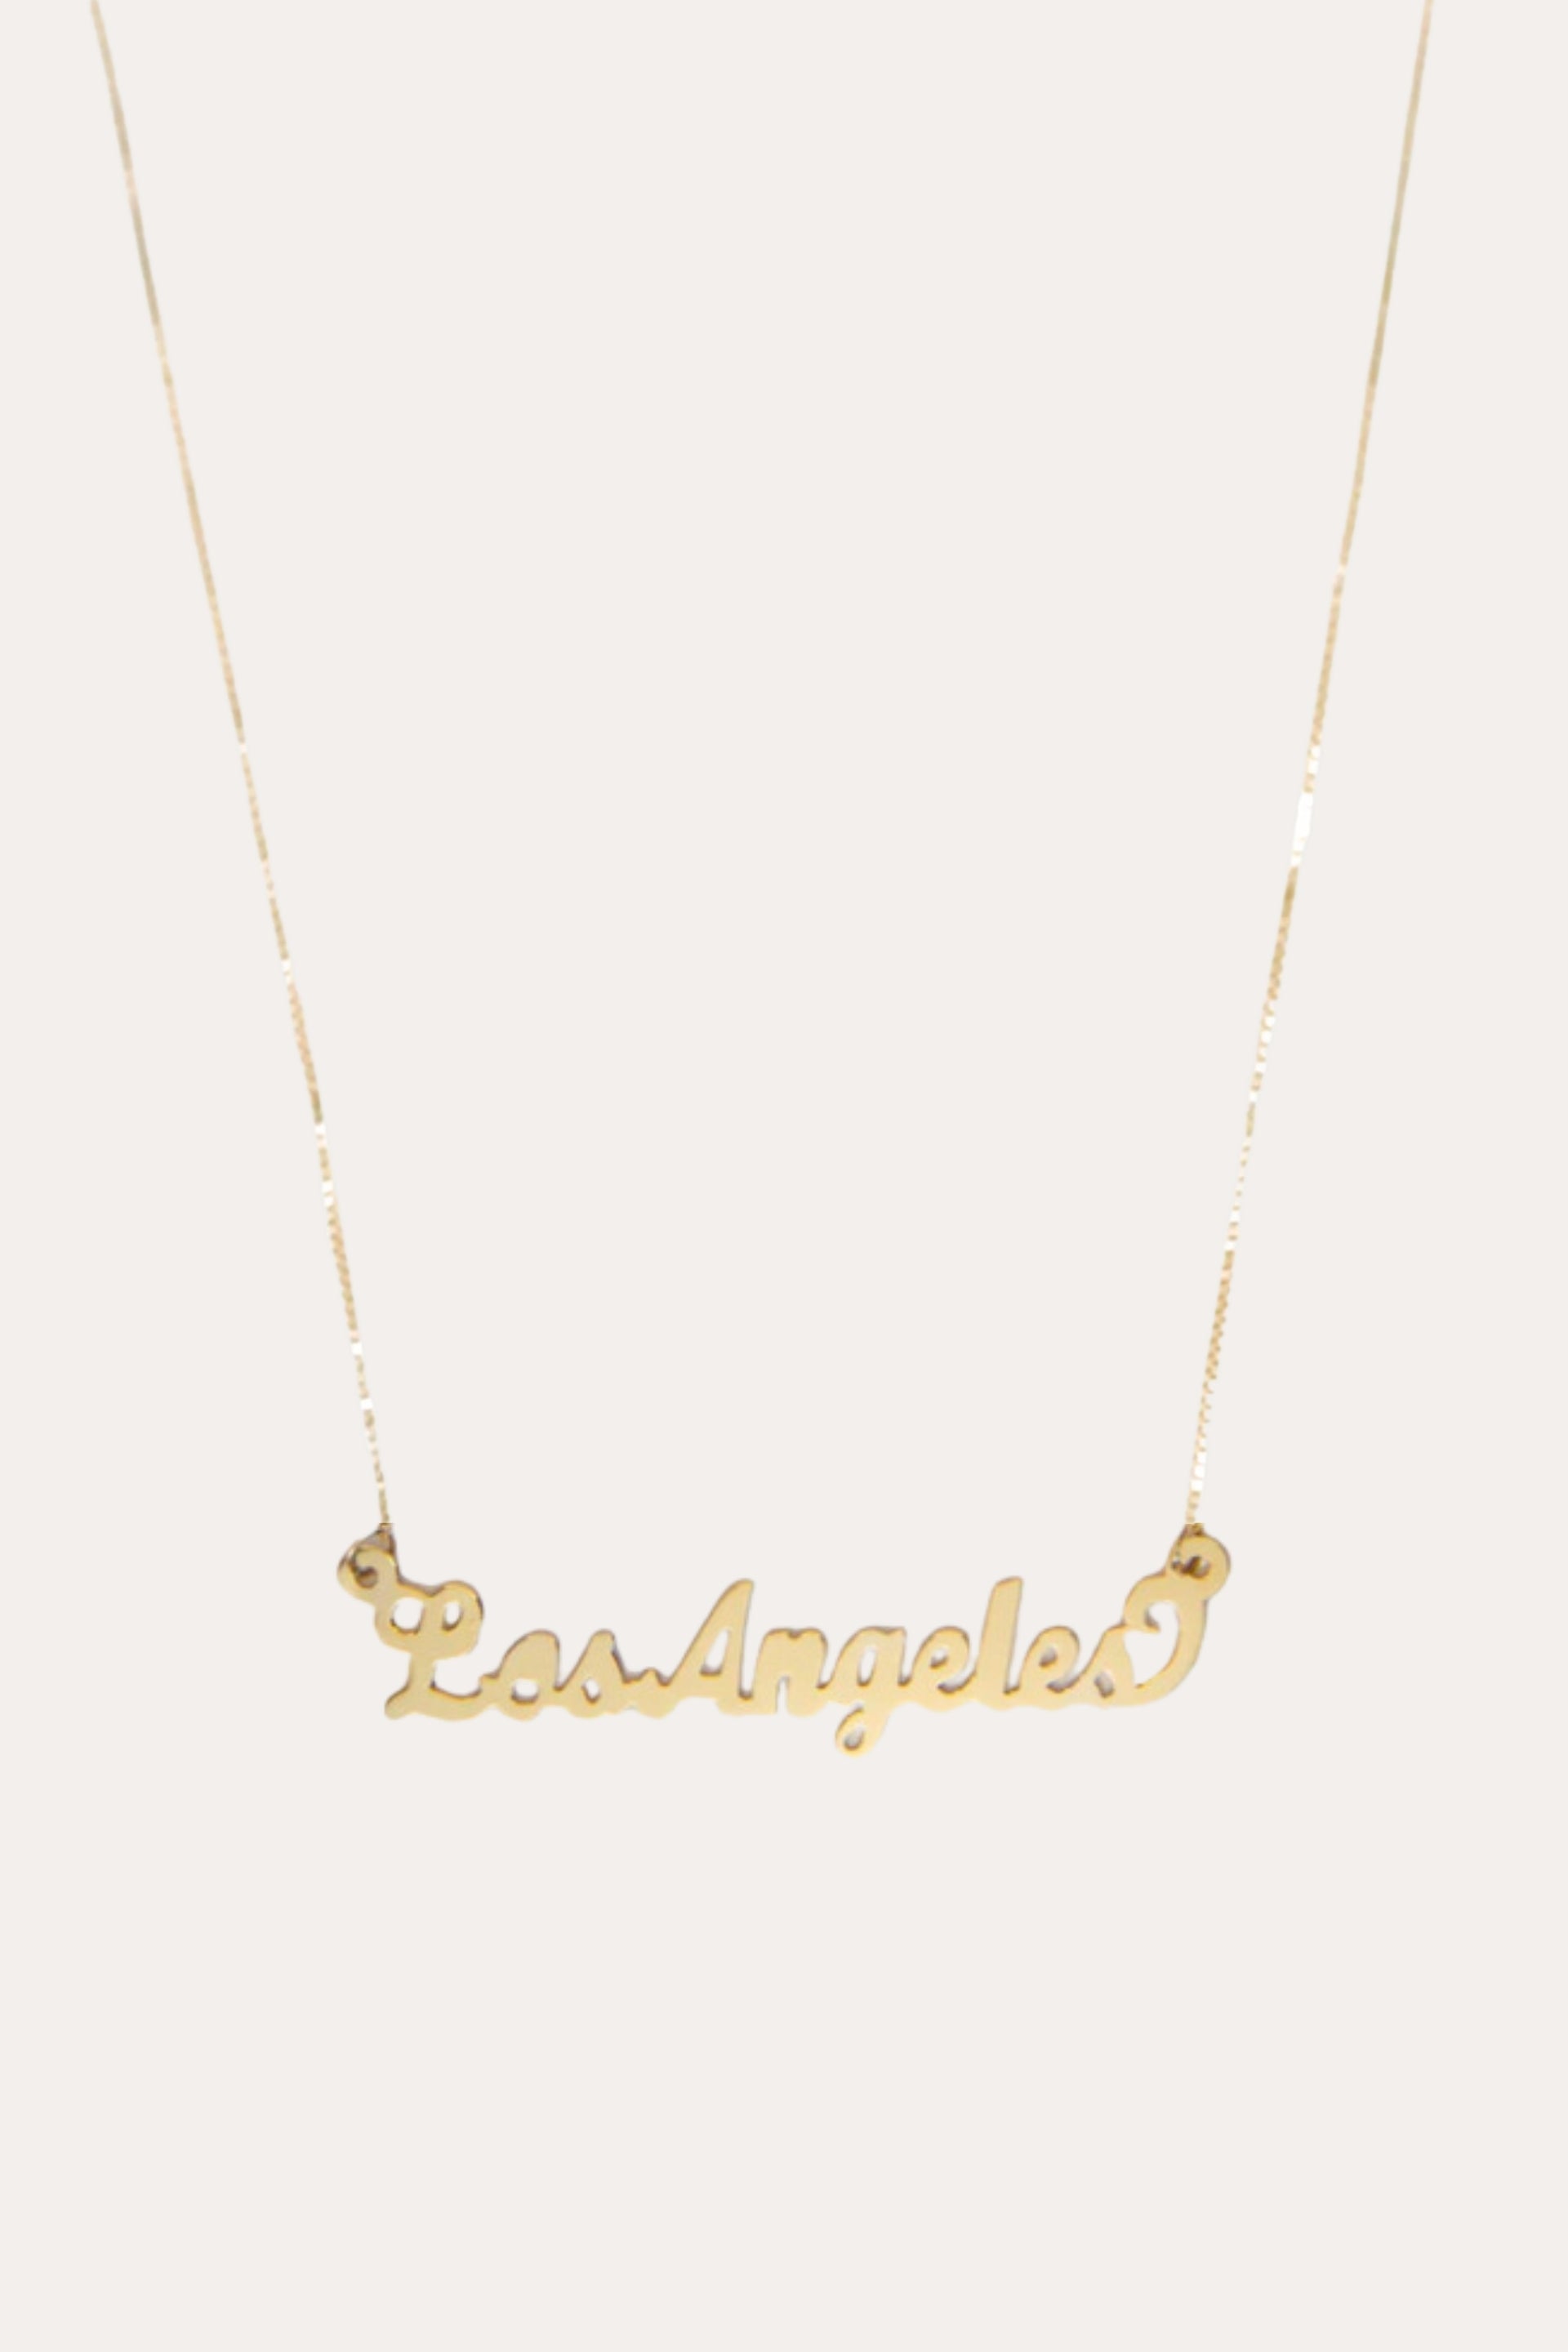 Customized Name Plate Necklace - 14k Yellow Gold